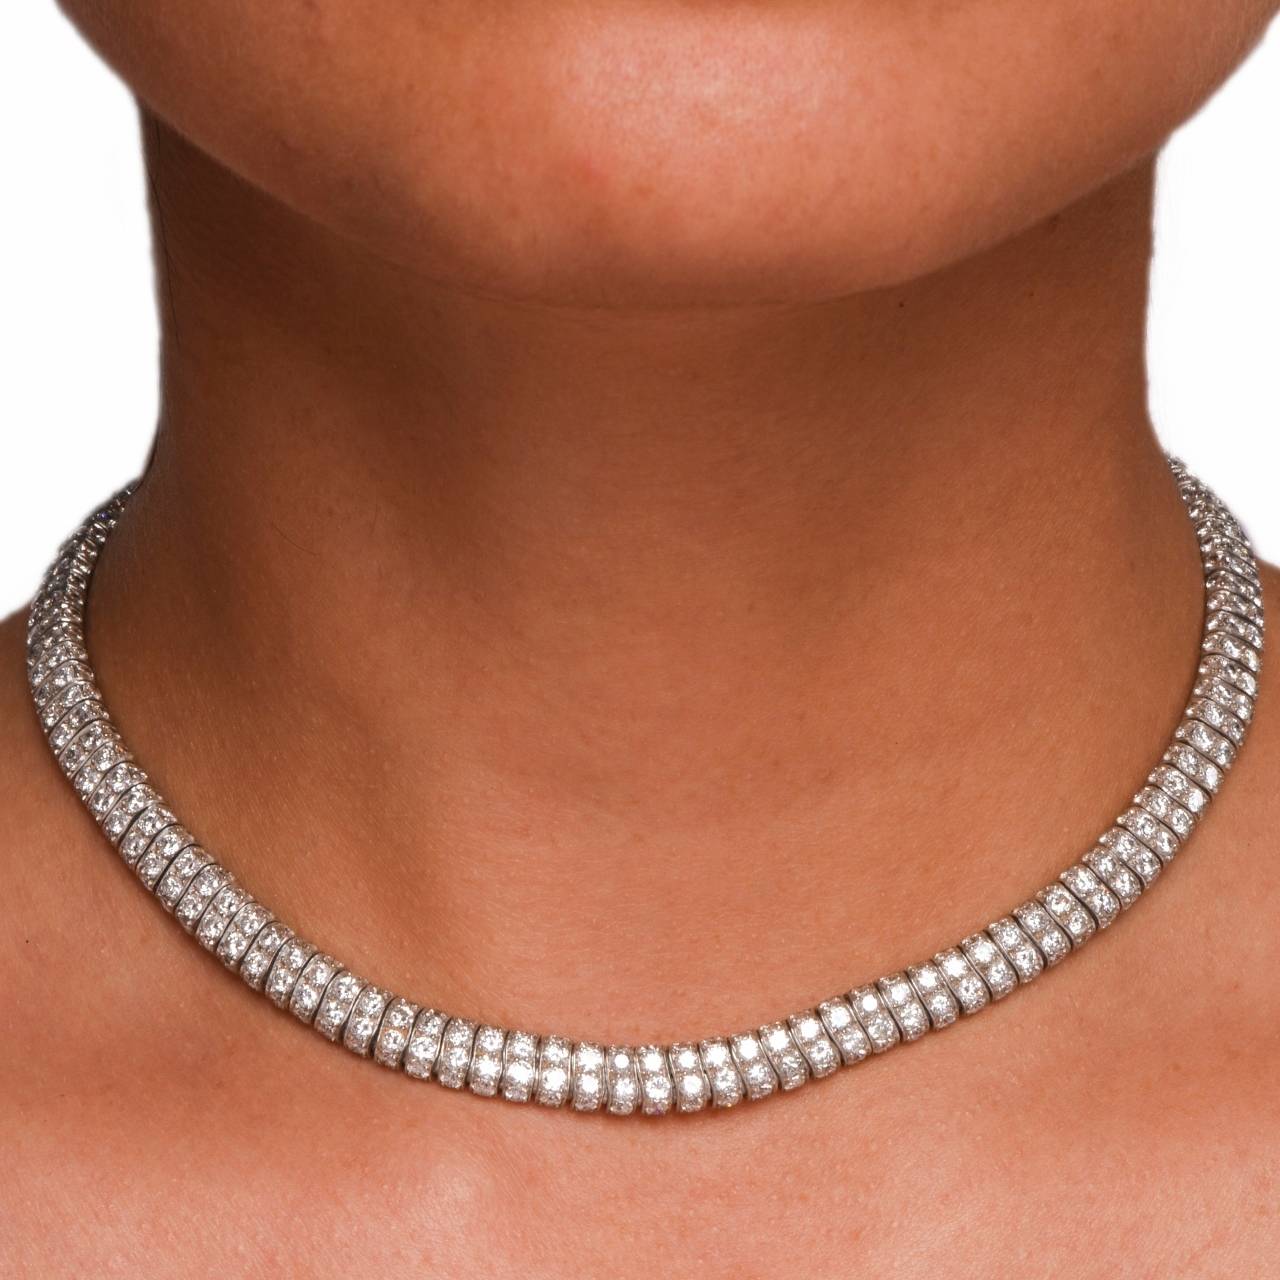 This vintage necklace of classic design is crated in solid platinum, incorporates 115 flexible links each exposing 4 round-faceted diamonds on 3 dimensions of the necklace. The total number of 460 constituent  diamonds prong-set throughout the